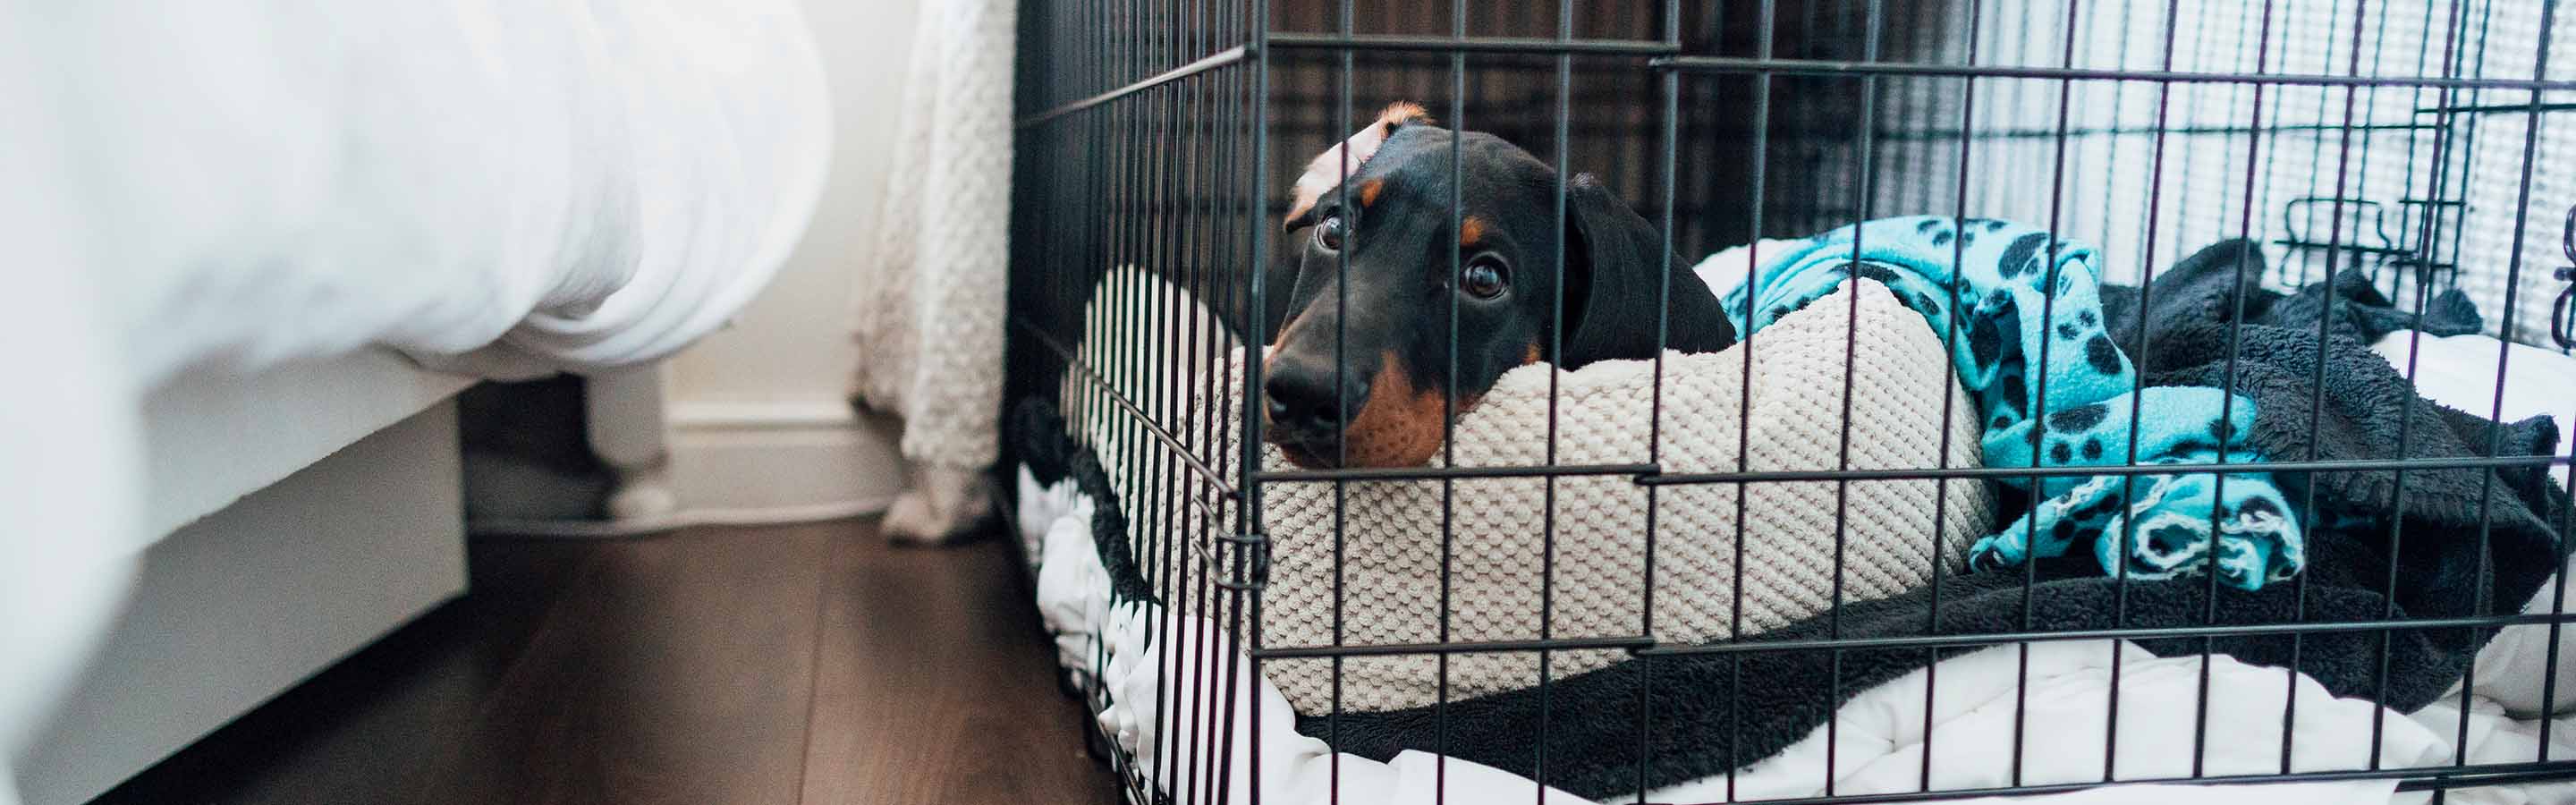 Puppy in a crate sick with Parvo